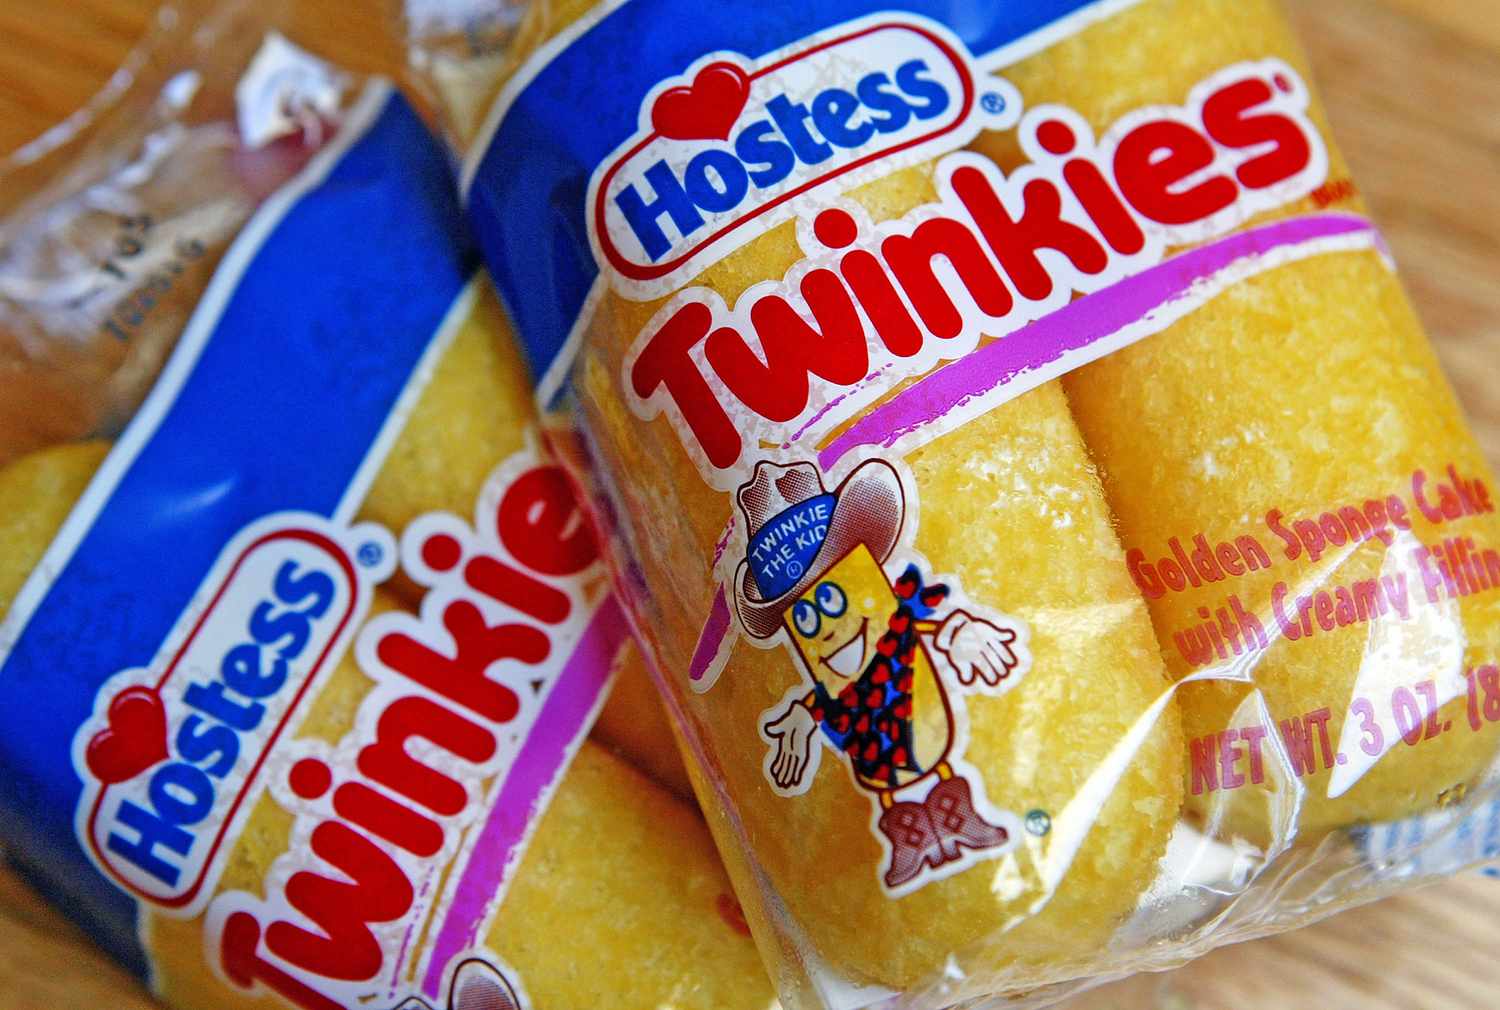 Scientists Are Examining Some Long-Expired Twinkies to See What's Wrong With Them